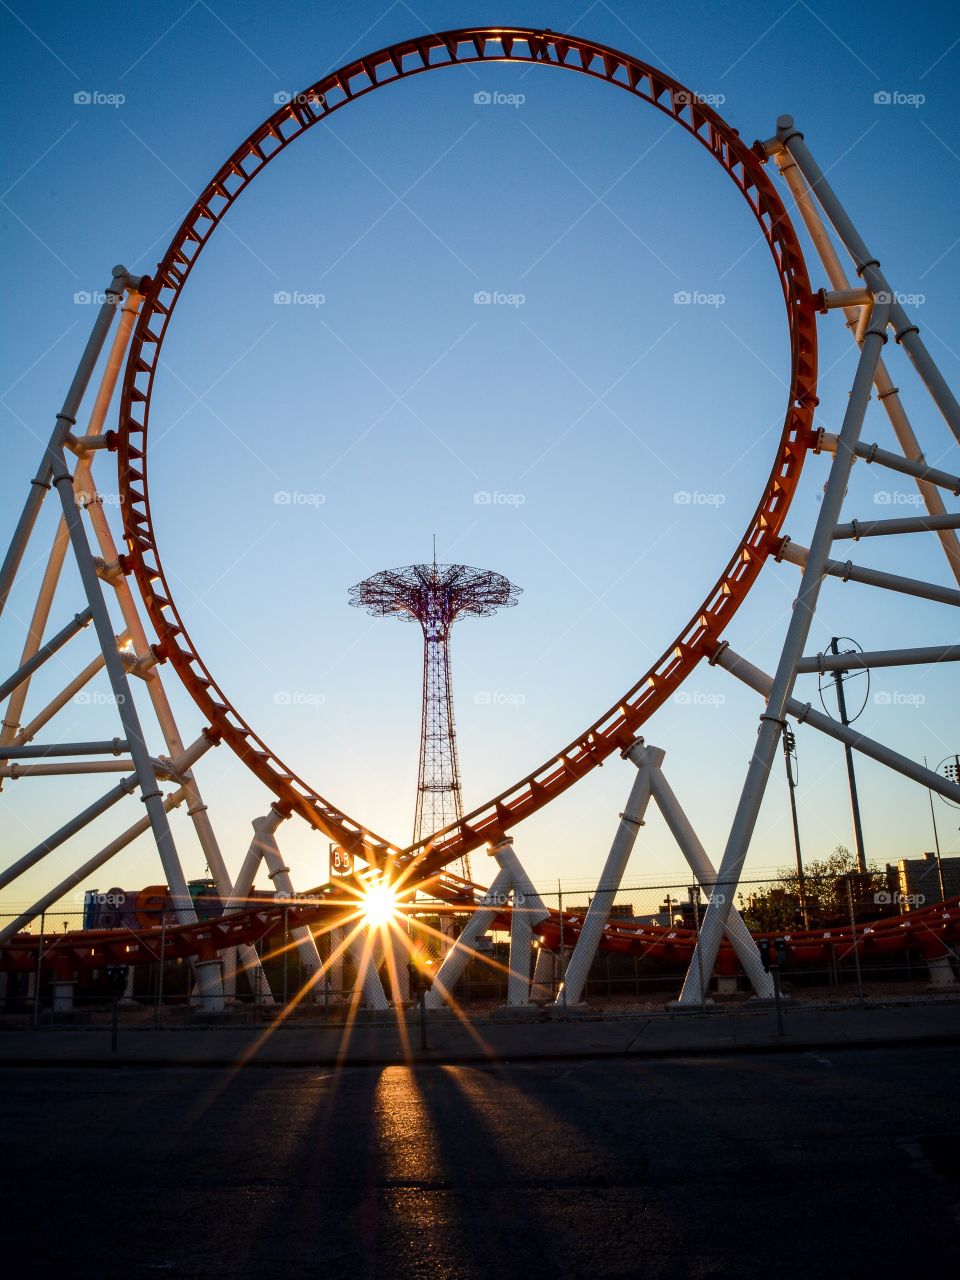 Coney Islands parachute jump through the Thunderbolt ride in midst of a beautiful sunset